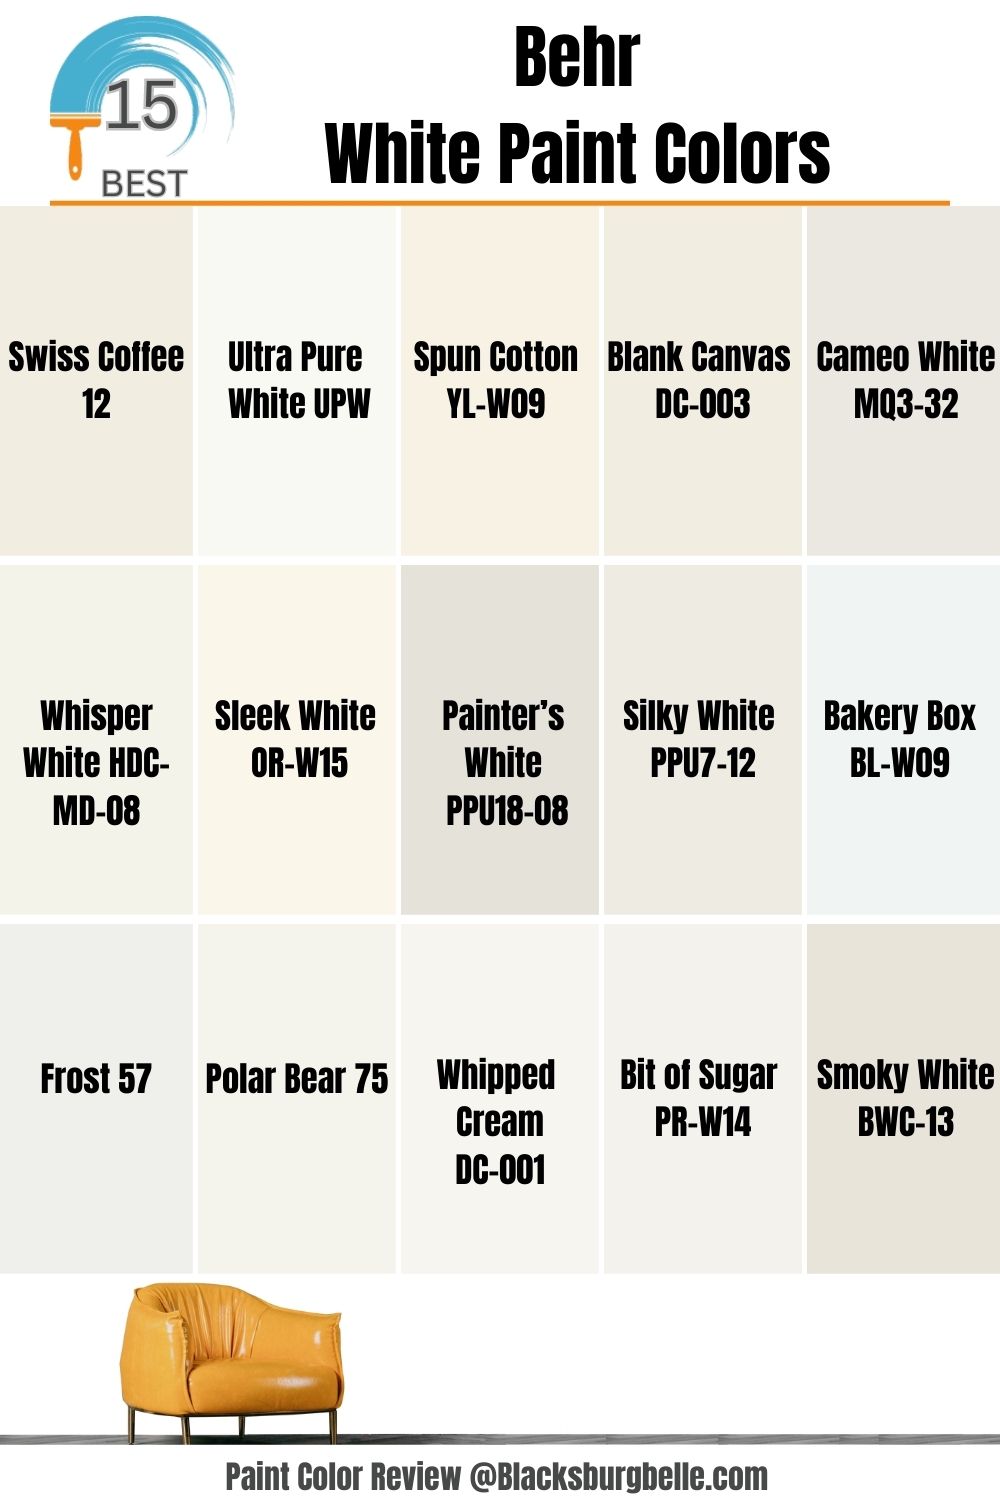 10 Best-Selling Behr Paint Colors of All Time